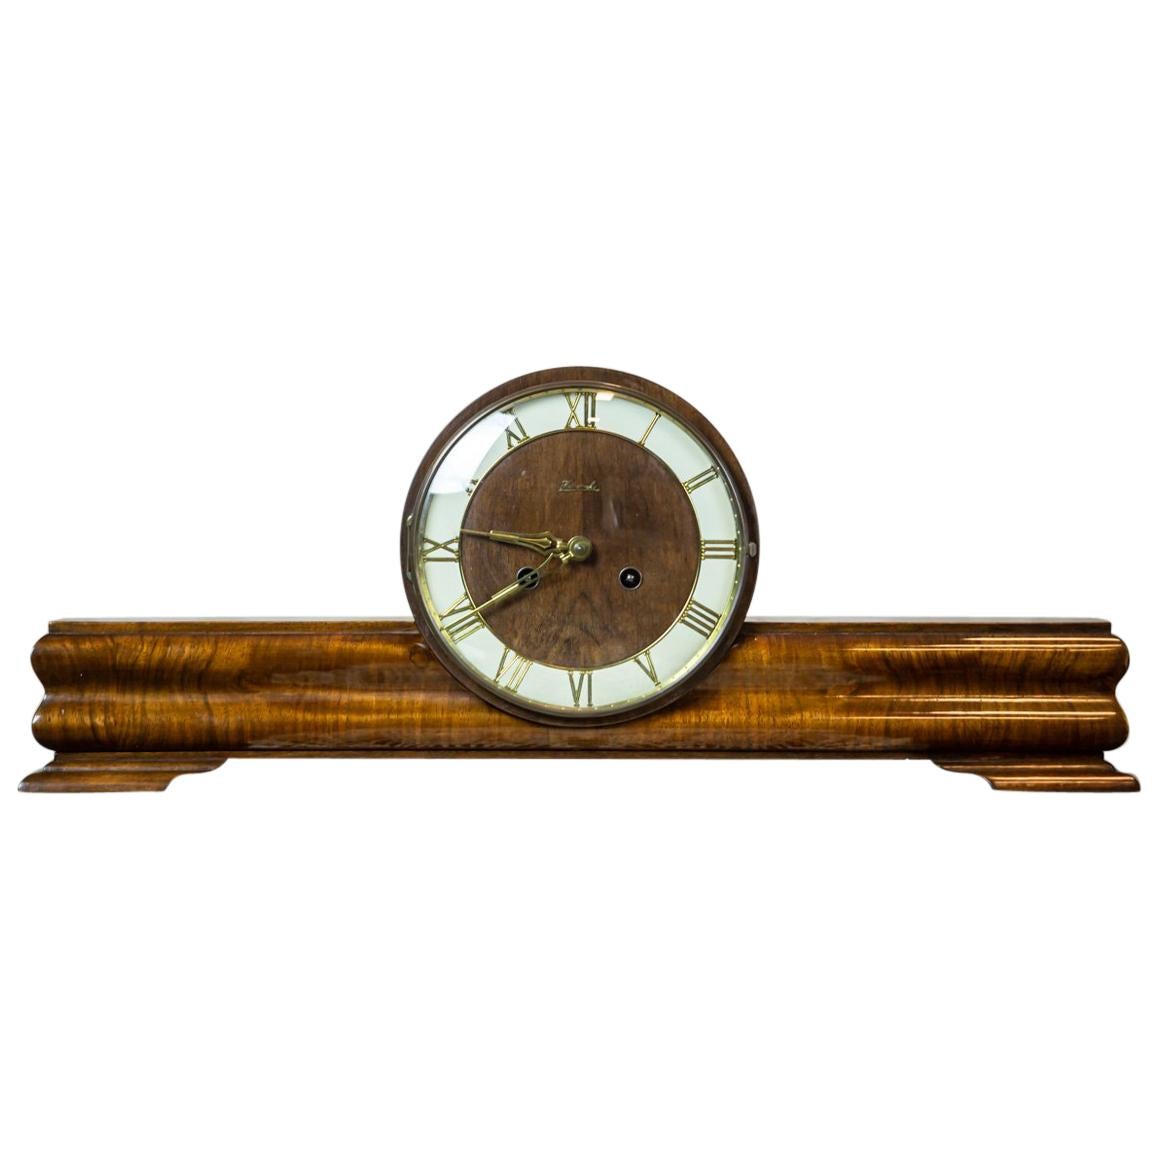 Art Deco Mantel Clock from the 1930s